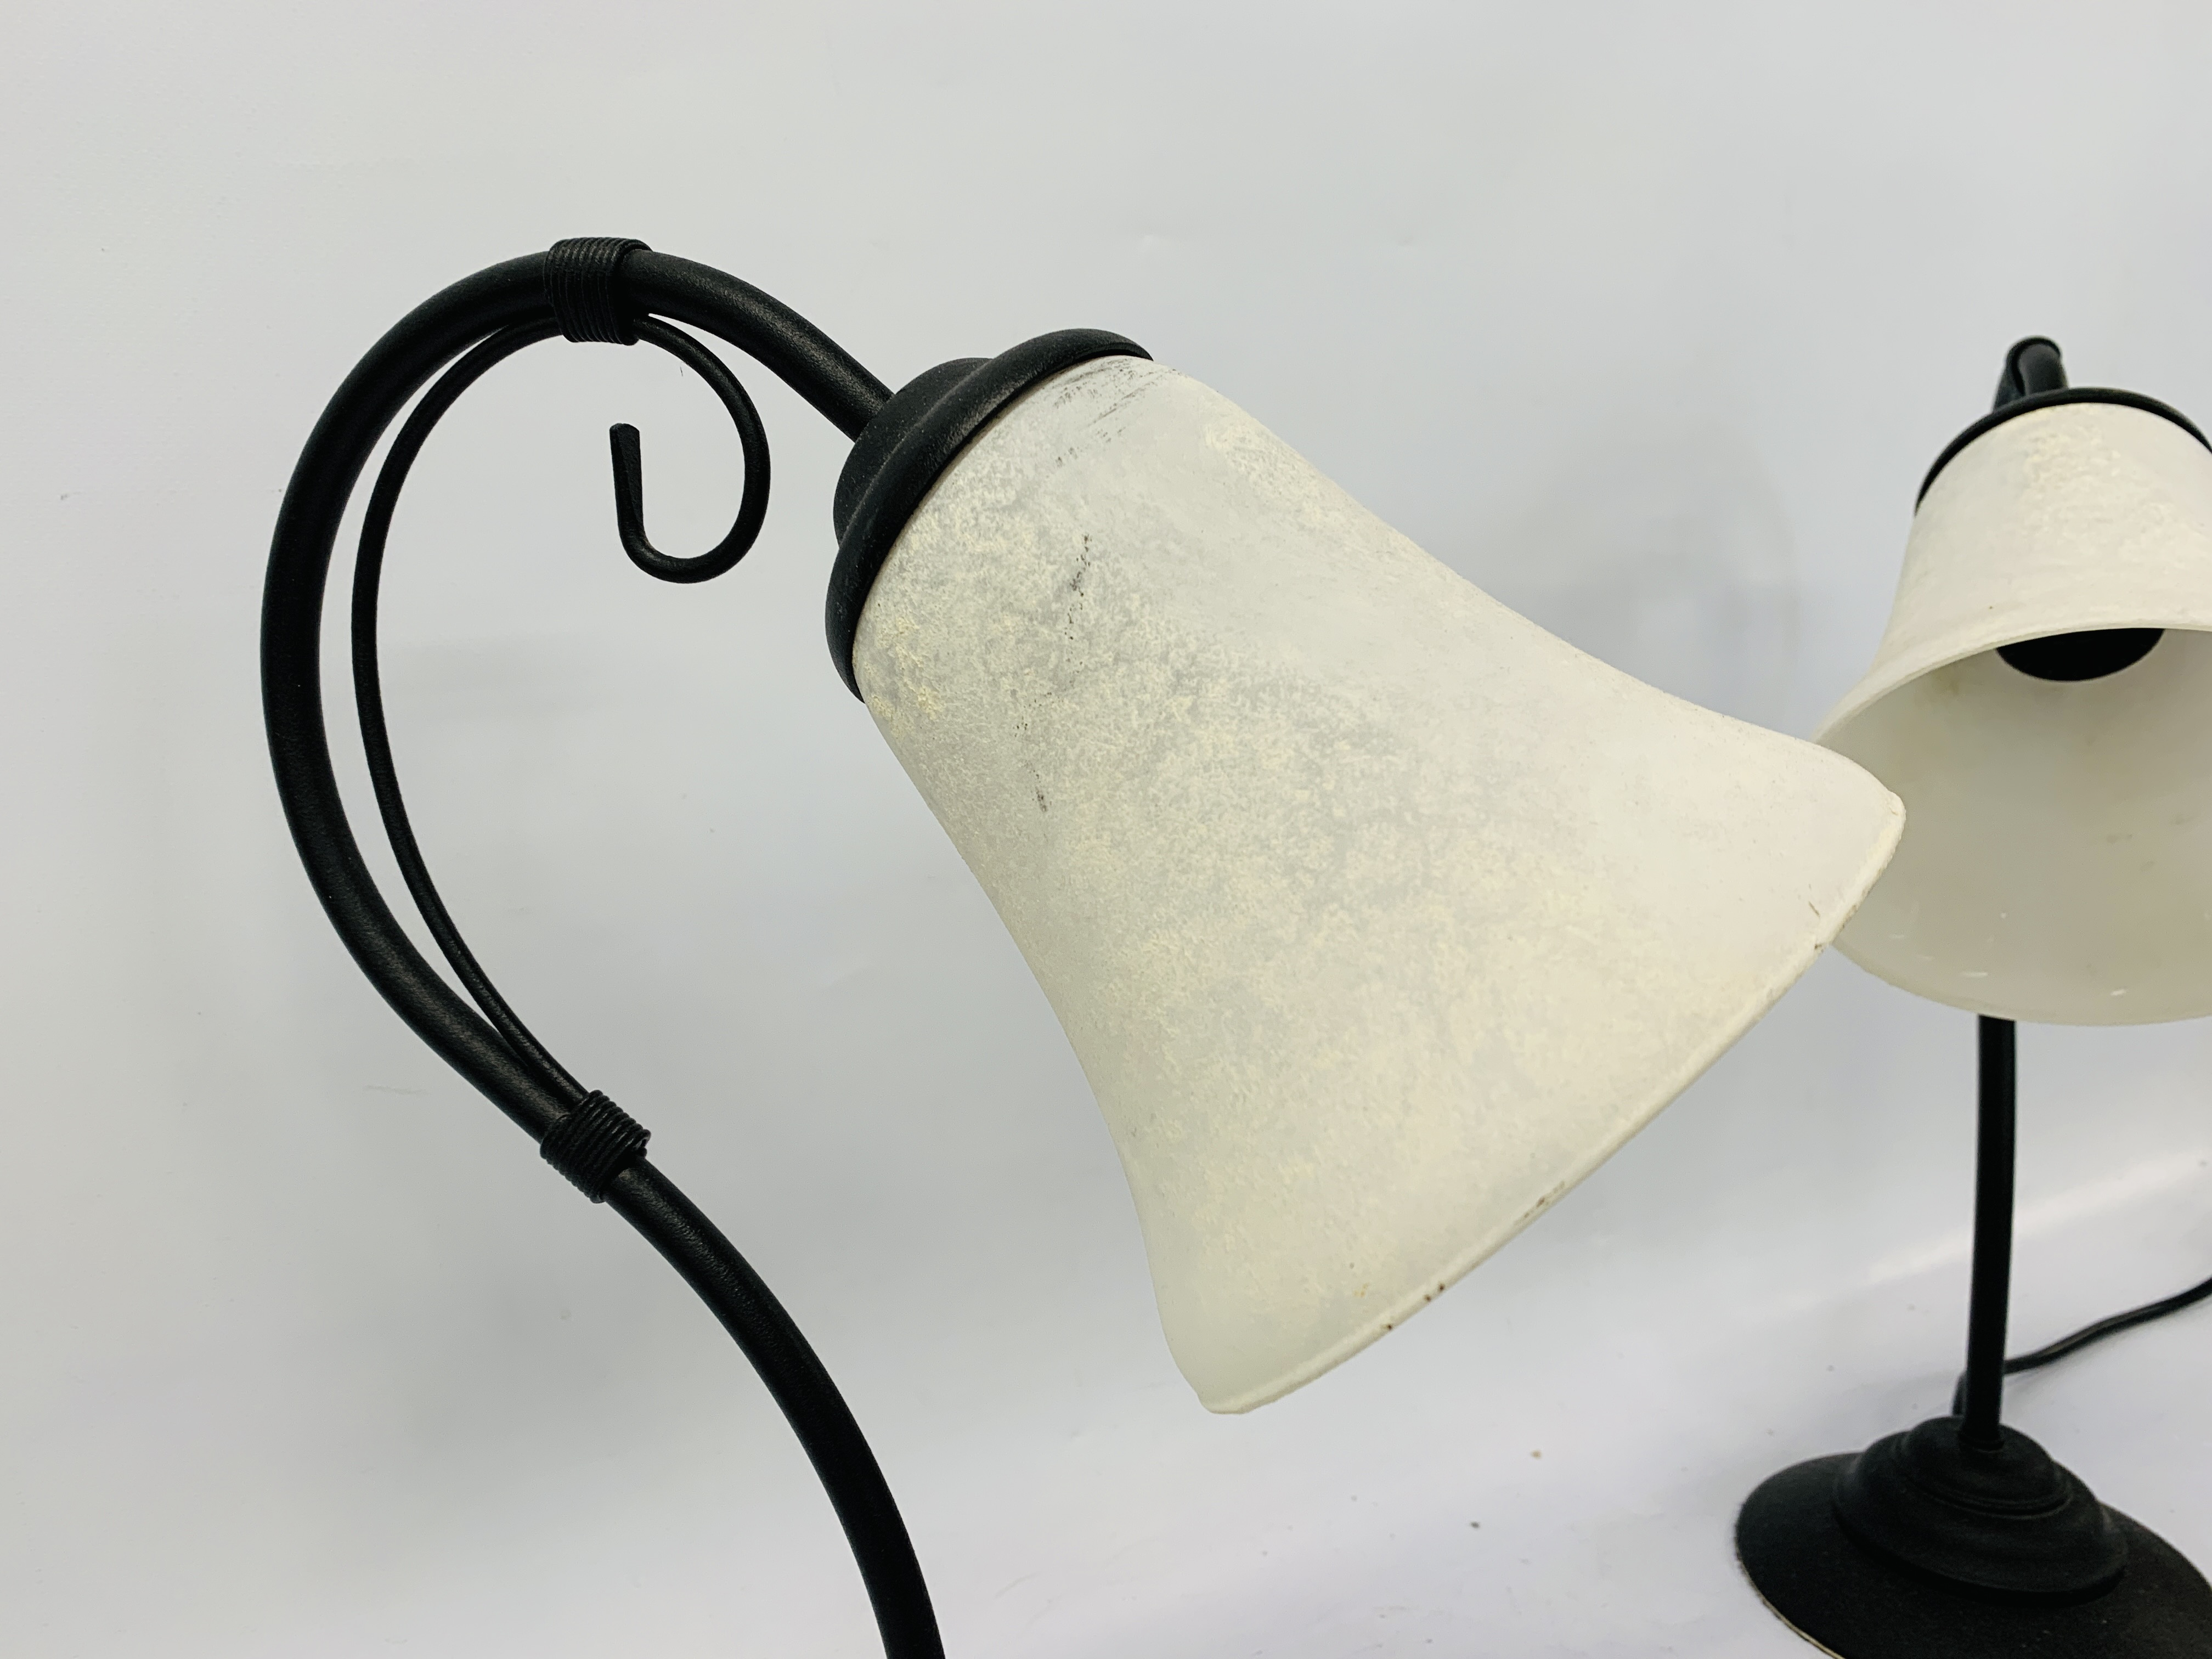 A PAIR OF MODERN SWAN NECK BEDSIDE LAMPS WITH OPAQUE GLASS SHADES - HEIGHT 38CM. - Image 5 of 5